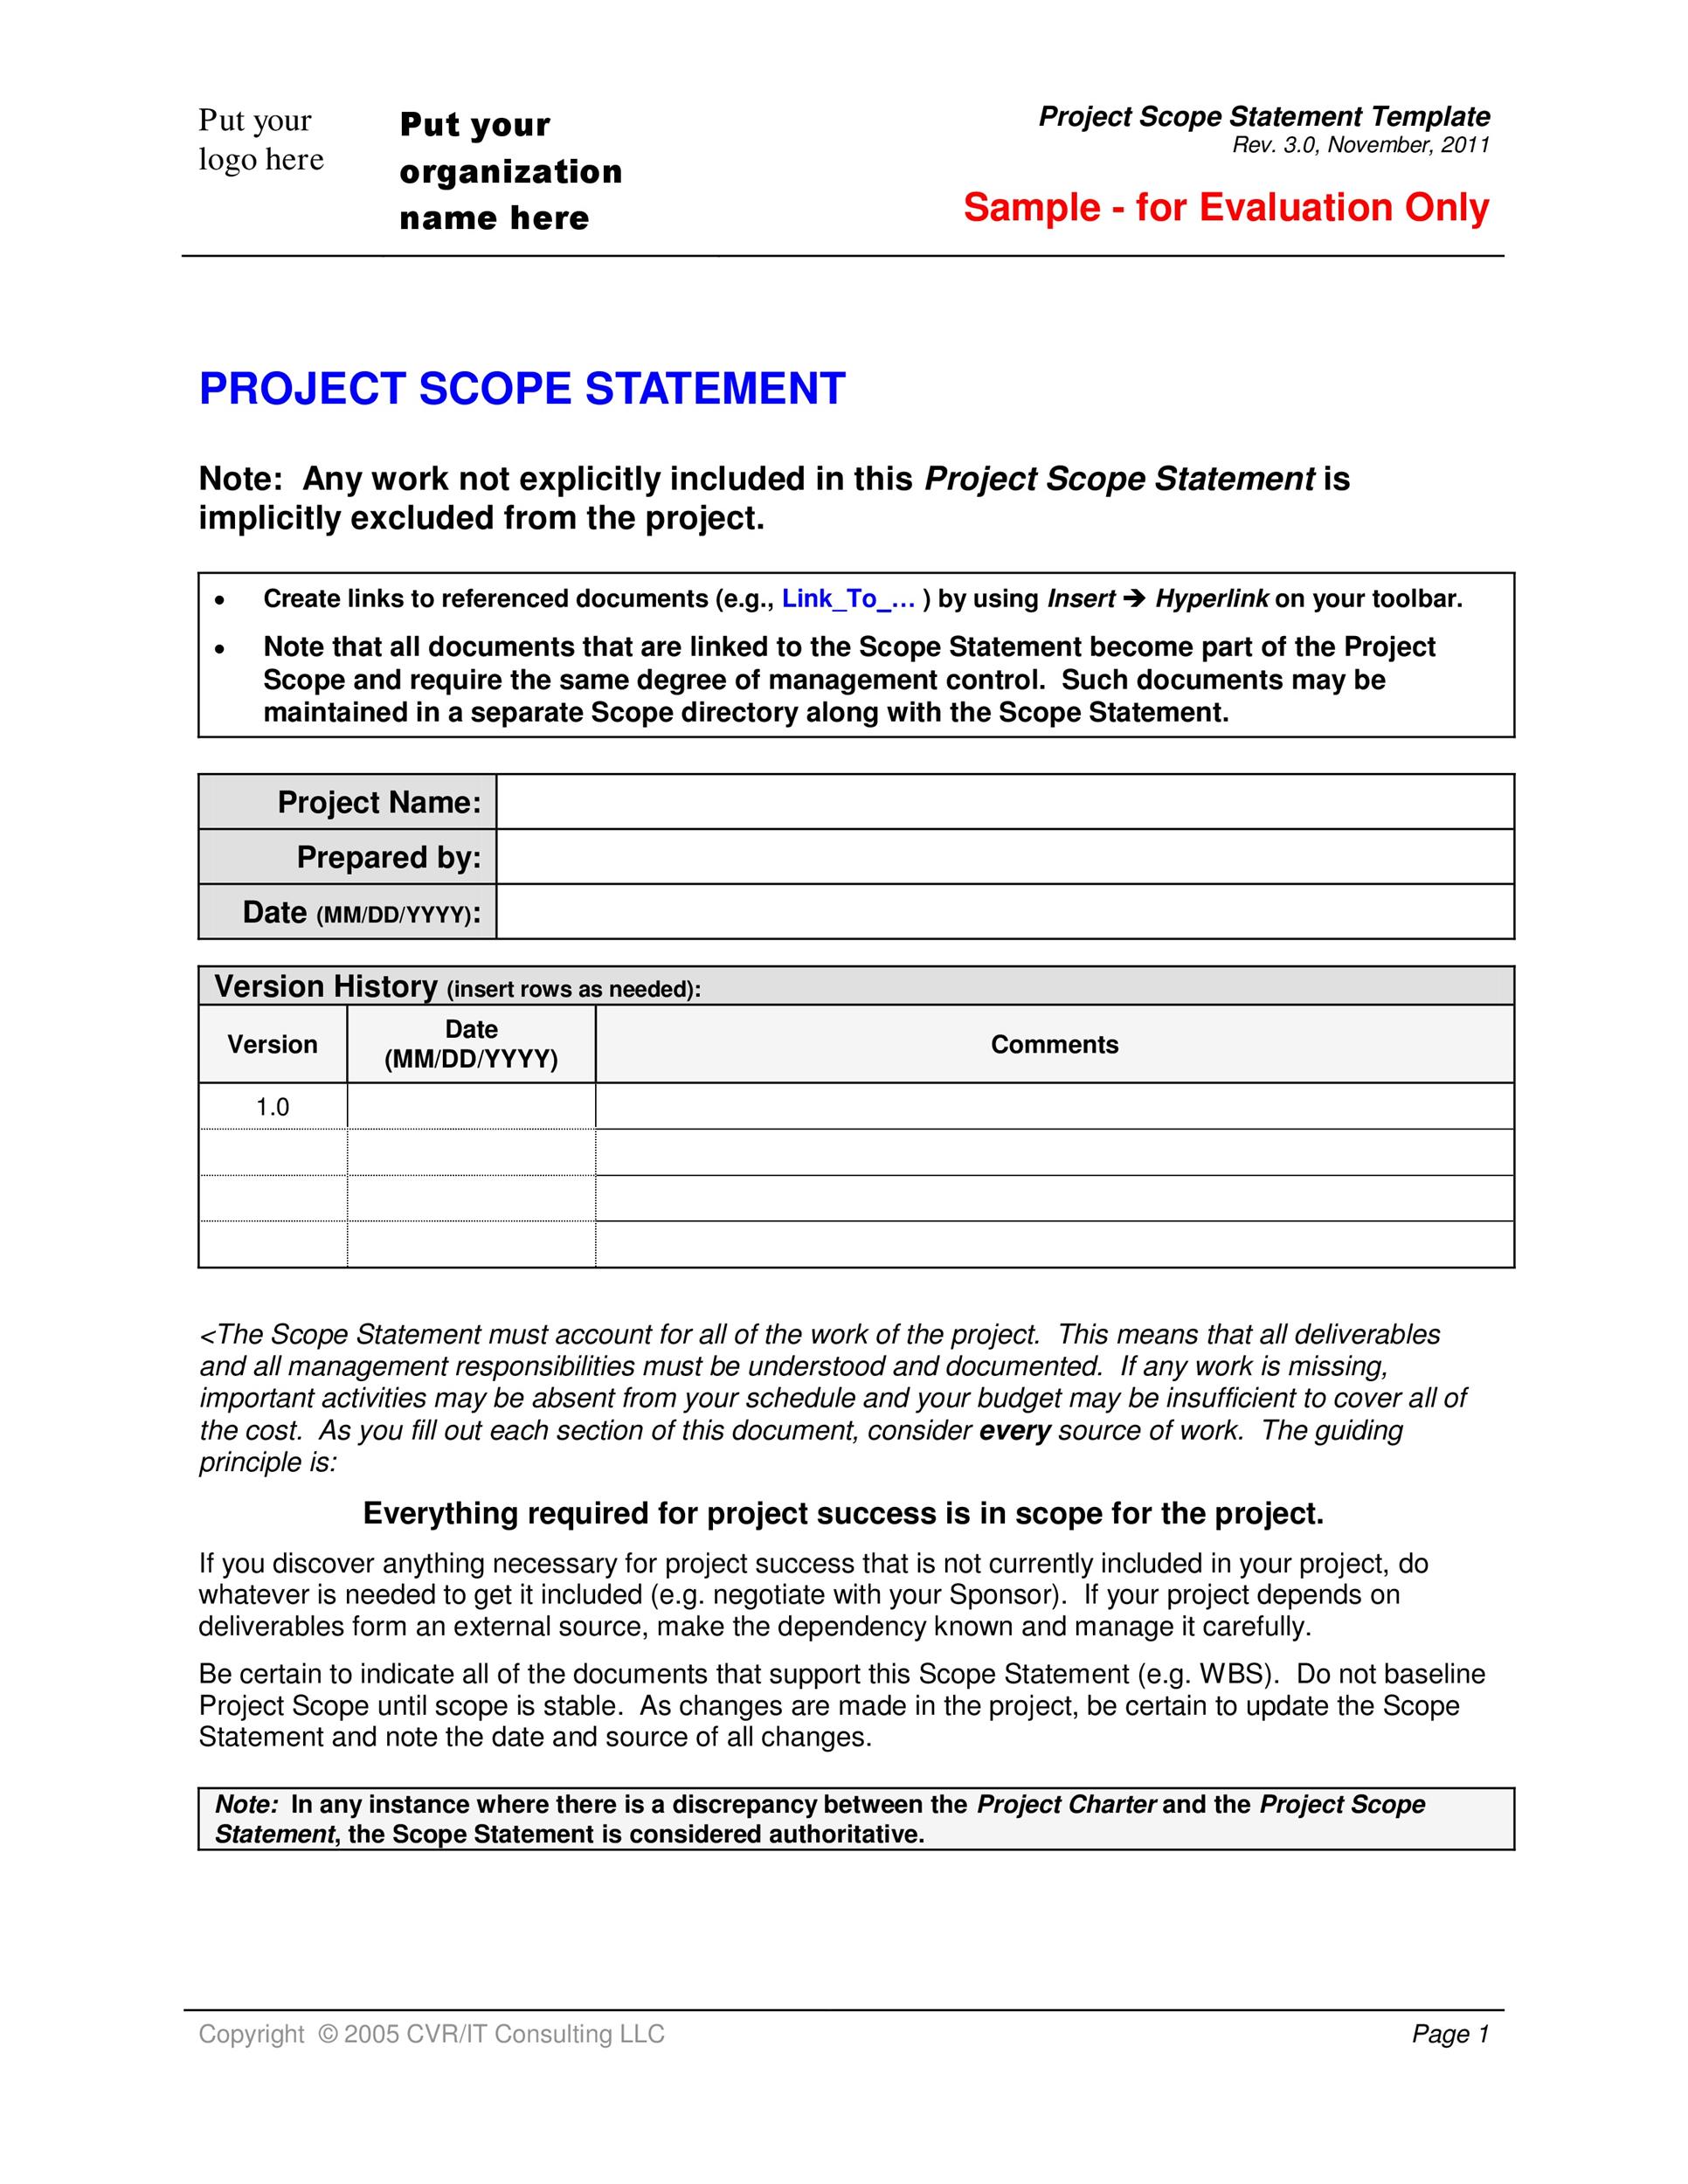 43 Project Scope Statement Templates Examples TemplateLab